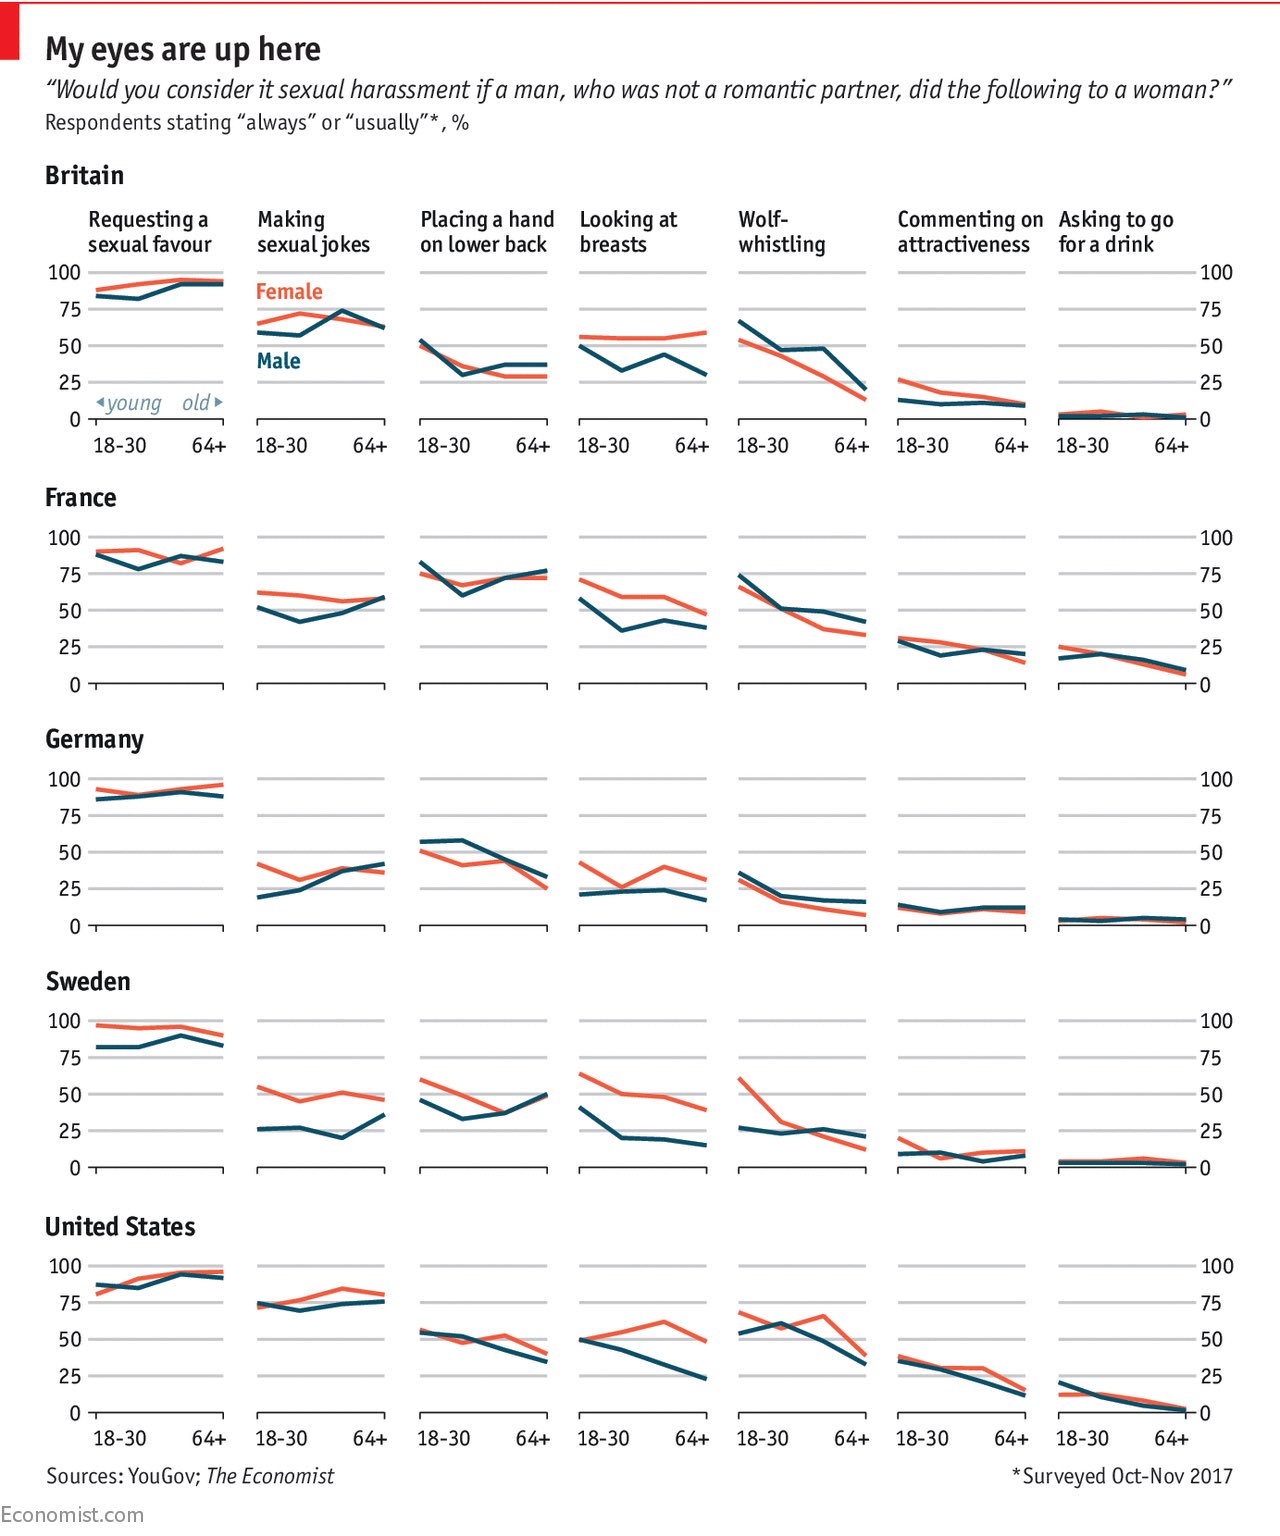 A grid of small multiple line charts that show what behaviour is considered sexual harassment in different age classes in different countries